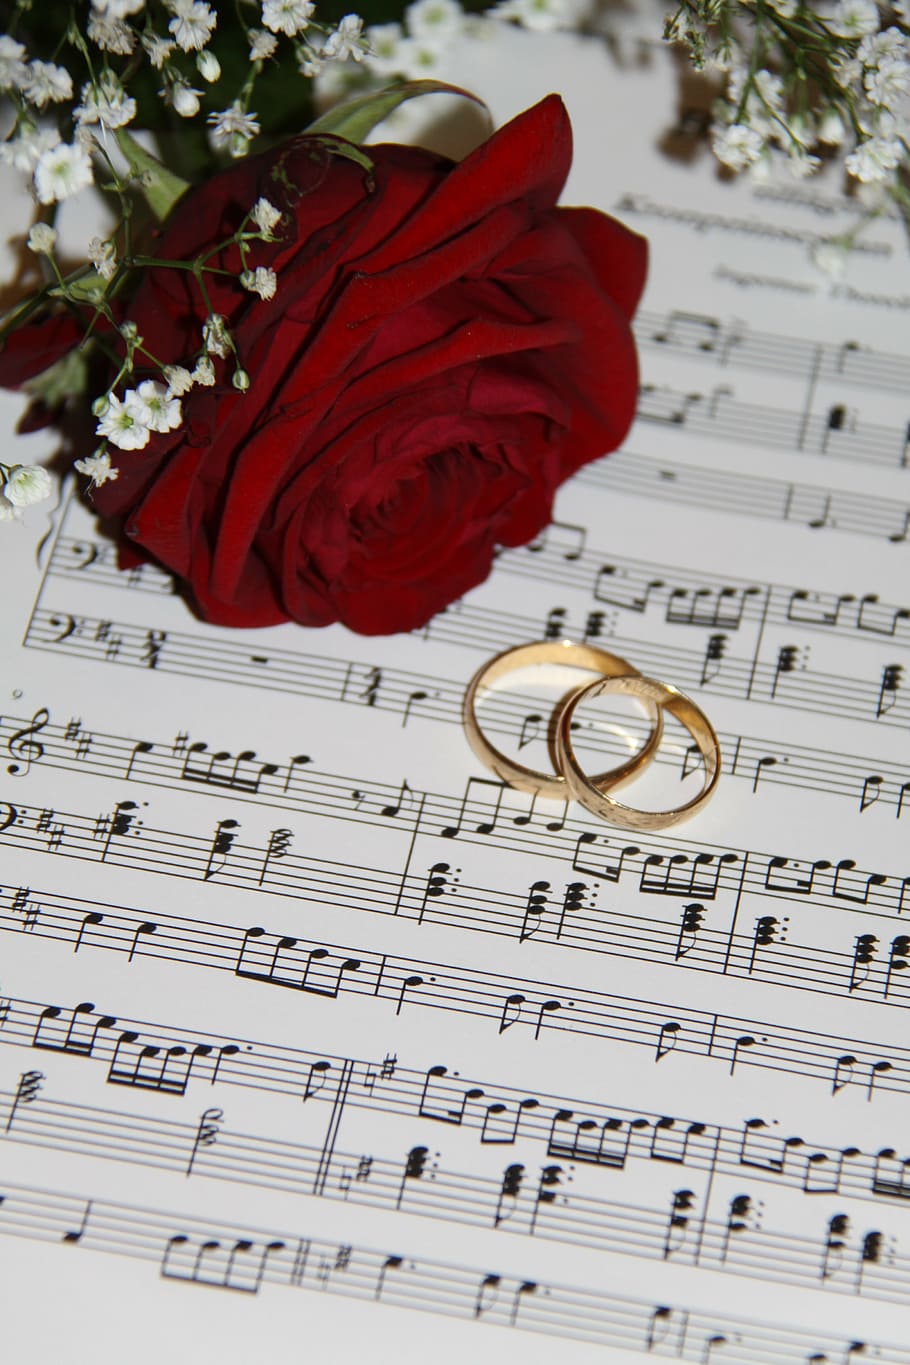 red, rose, flower, pair, gold-colored wedding bands, wedding, ros, call, remarks, music